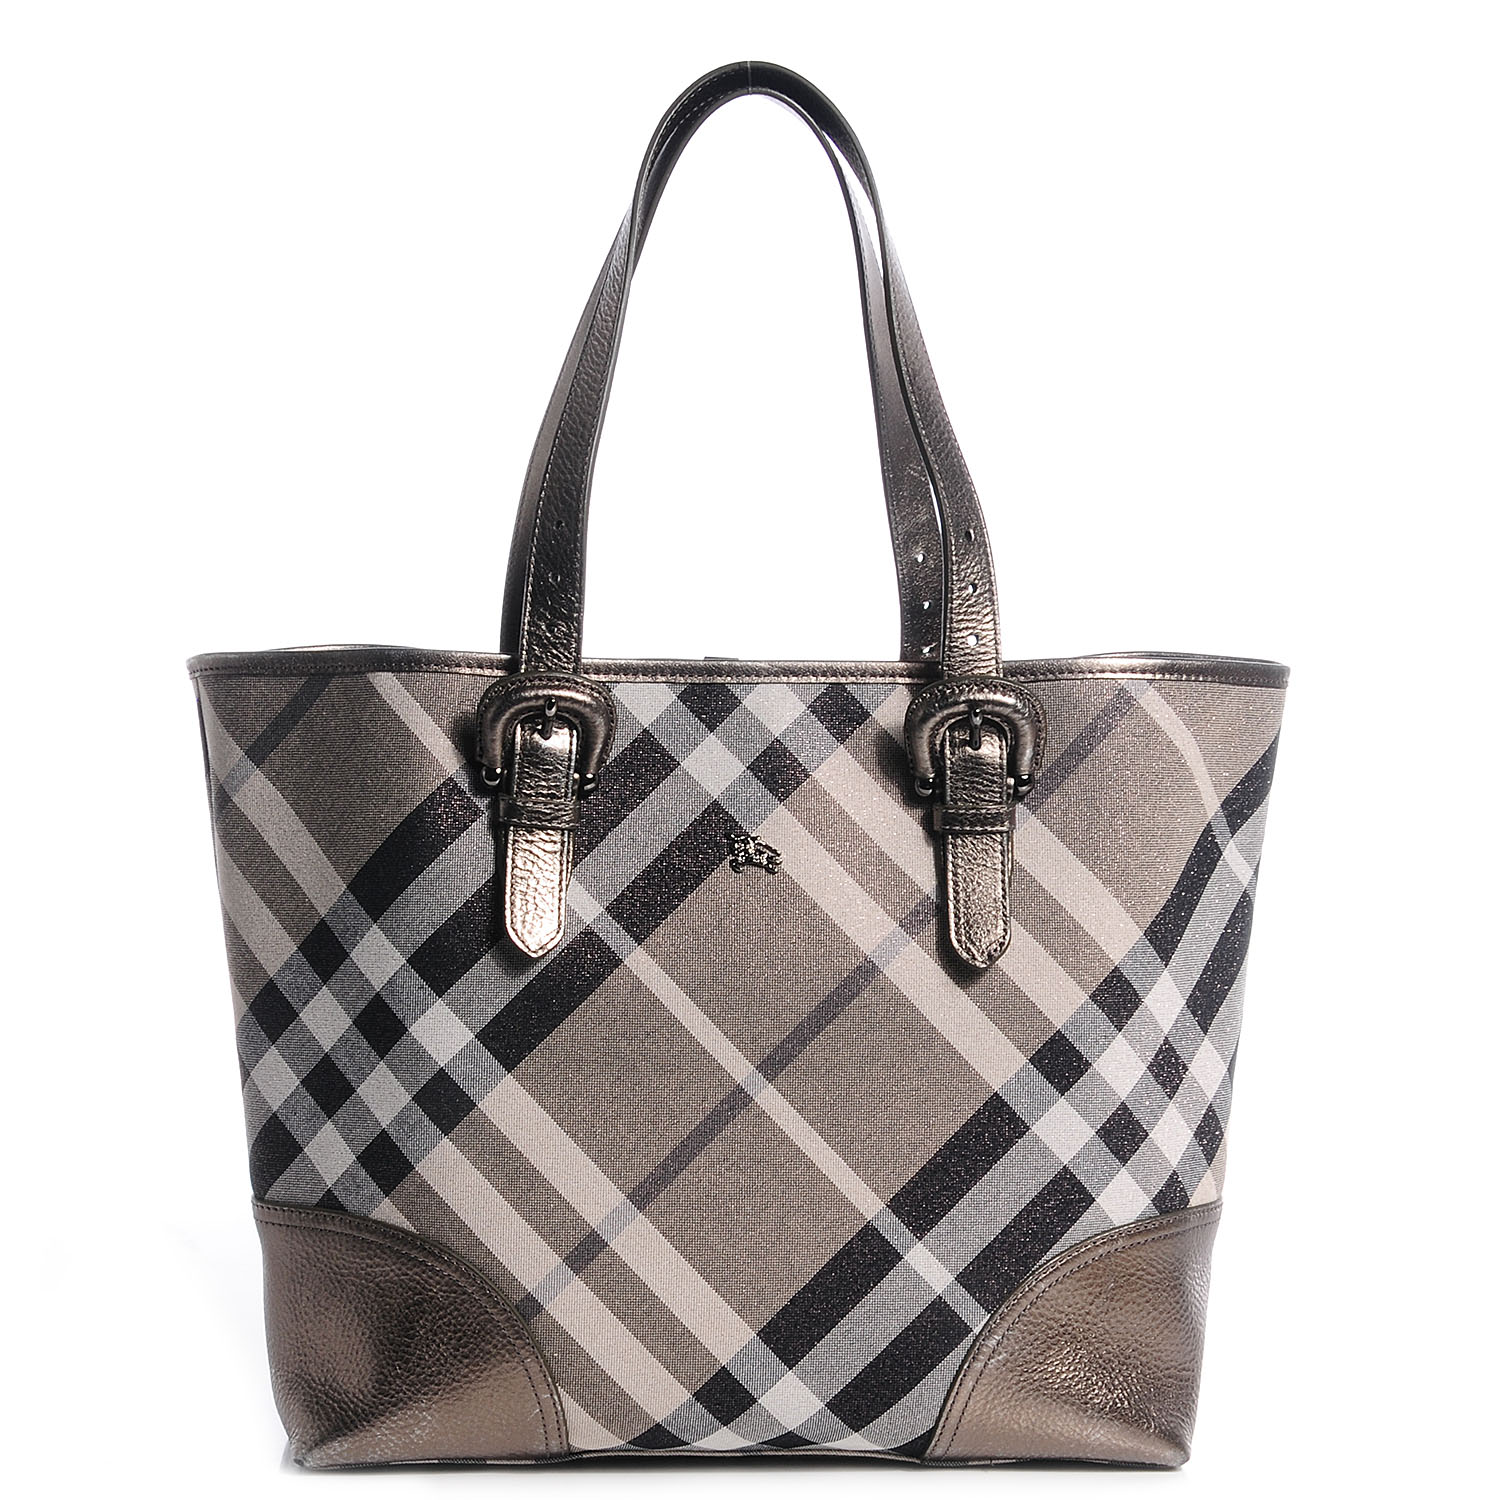 burberry tote bag silver